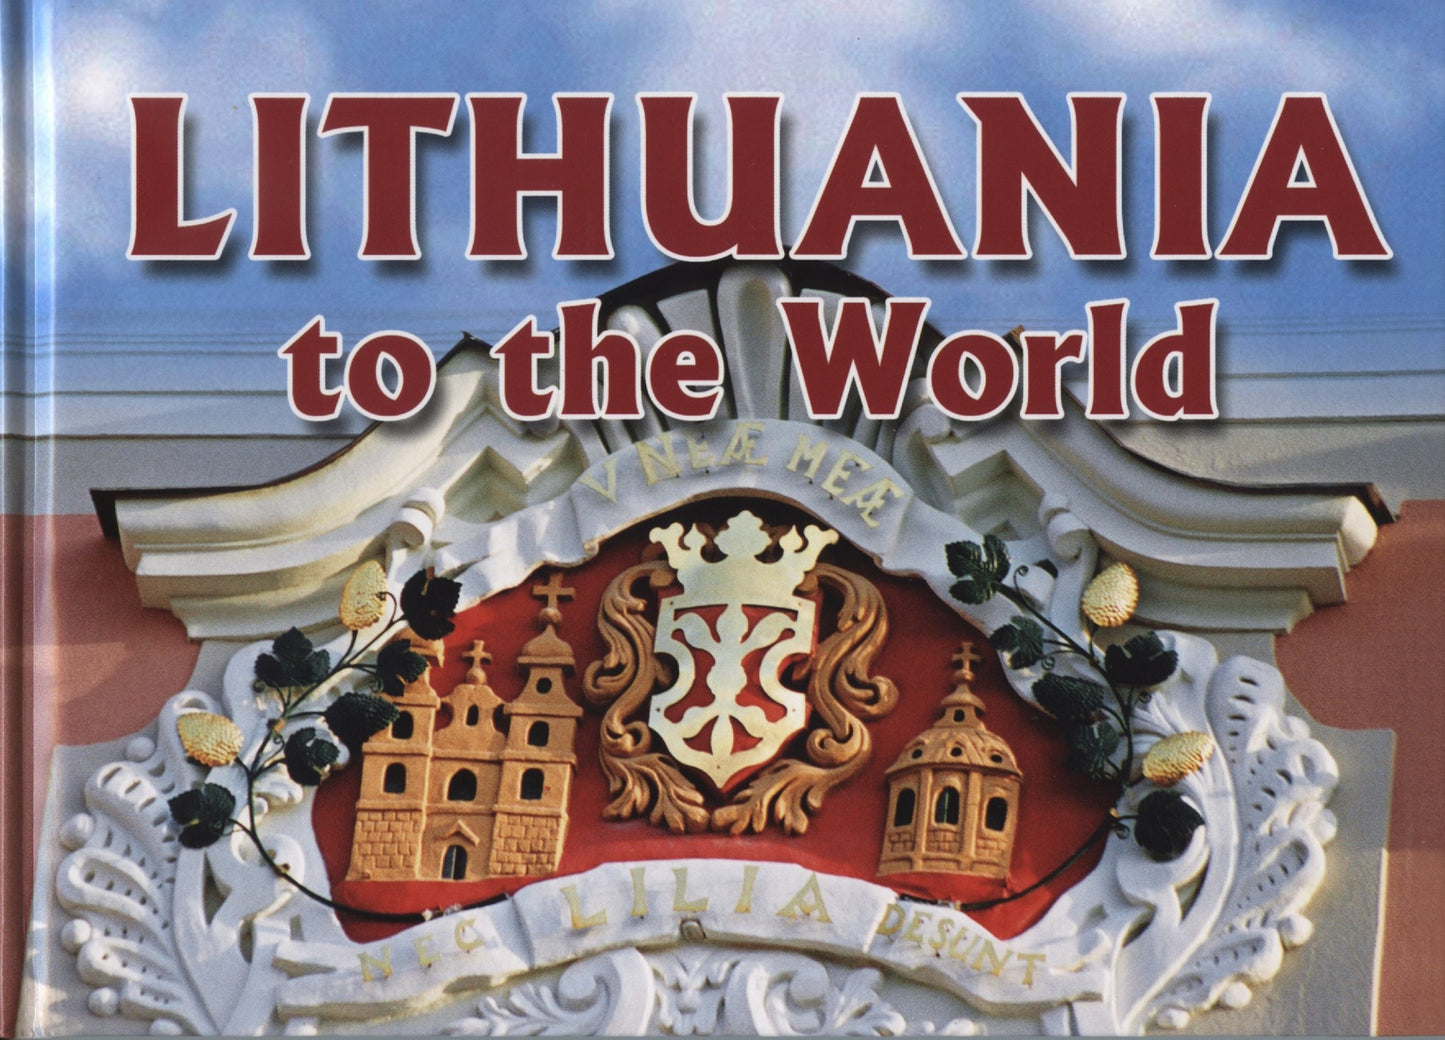 Lithuania to the World